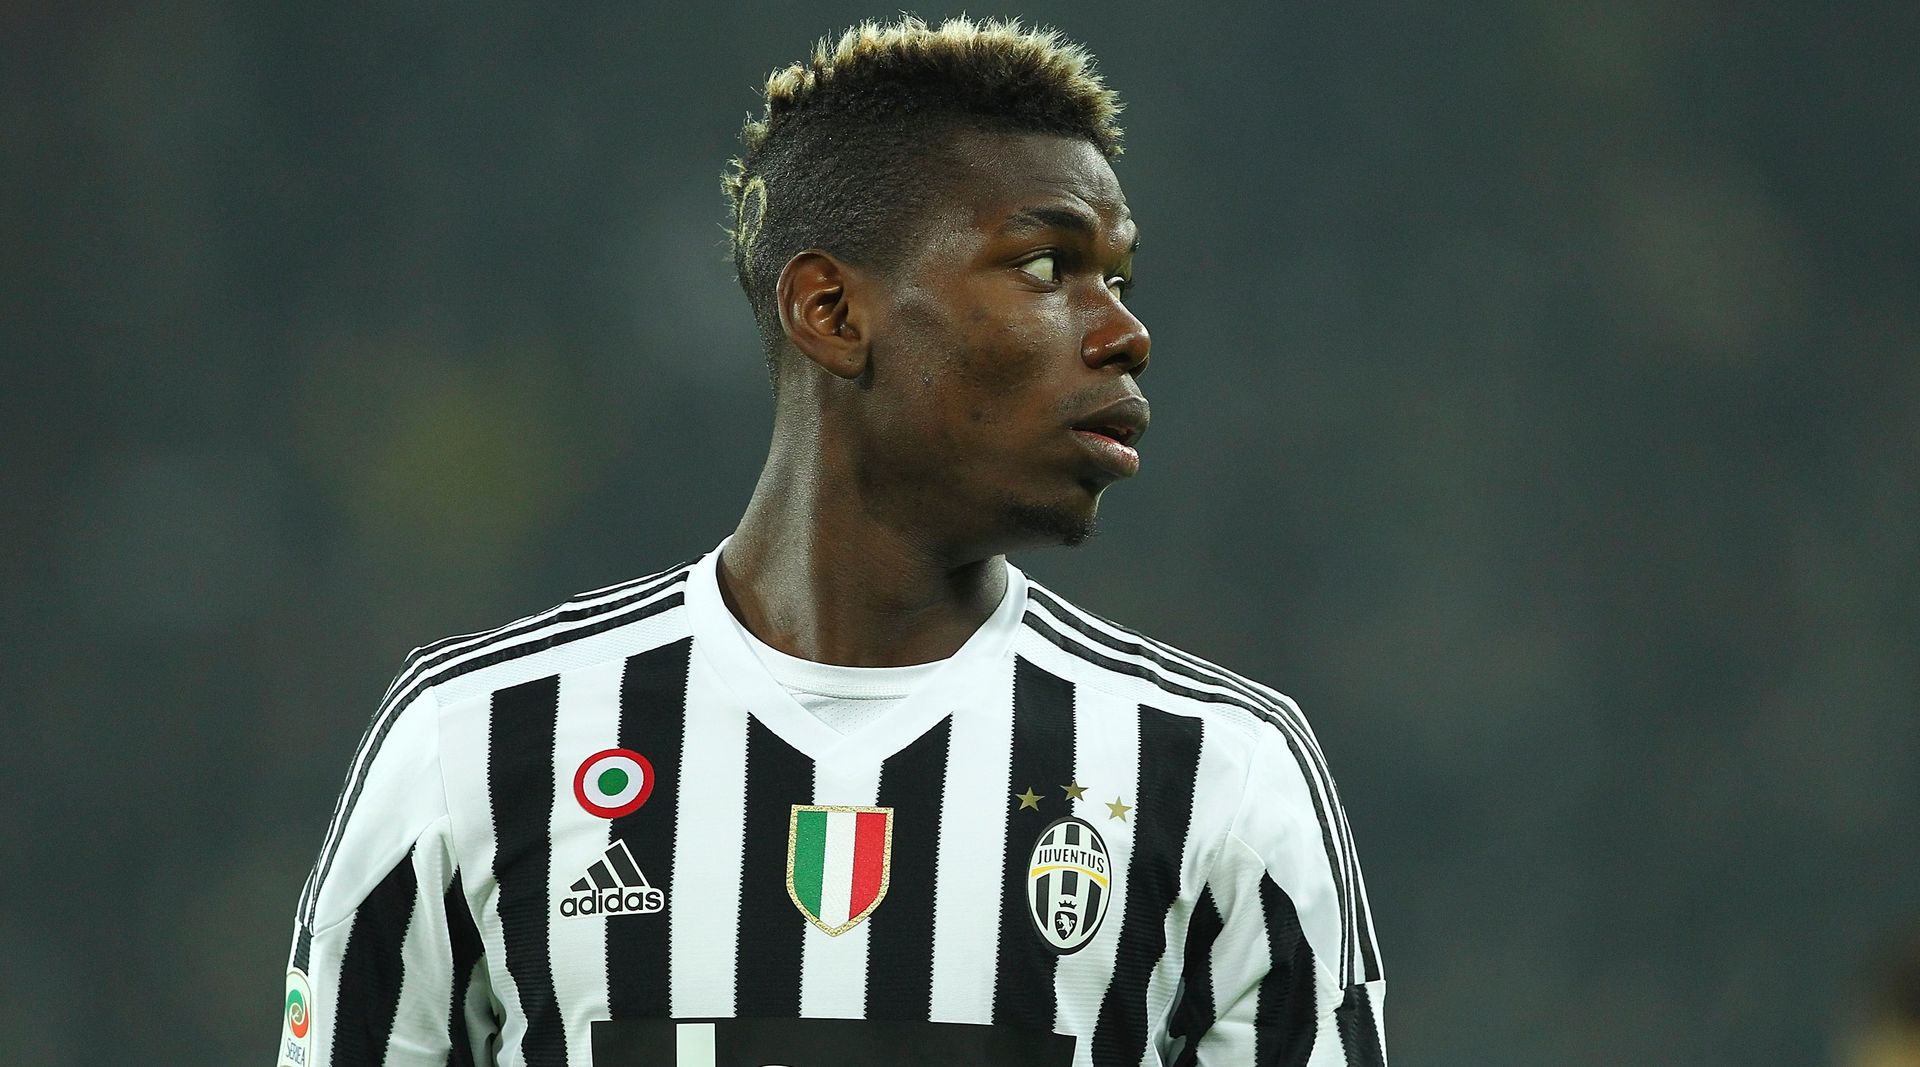 <p>                     In between his two stints at Manchester United, Paul Pogba starred in four Serie A title-winning sides at Juventus – and made it into three Teams of the Year.                   </p>                                      <p>                     Arguably one of the most underrated players of his generation, the 2018 World Cup-winning Frenchman has to go down among the Italian top flight’s finest midfielders of the modern era.                   </p>